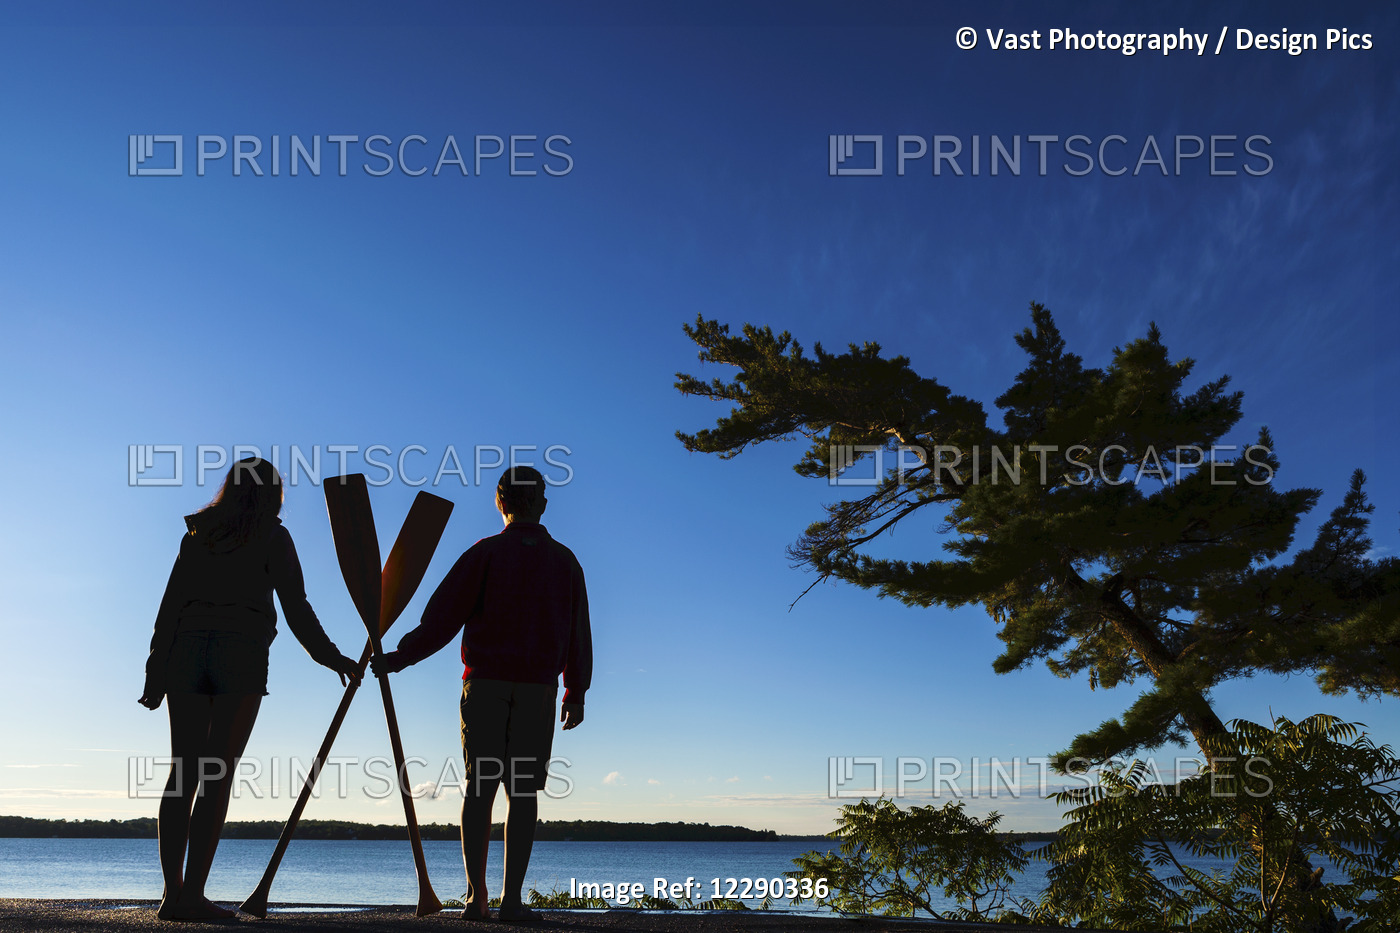 Boy And Girl Holding Paddles Overlooking Balsam Lake At Sunrise; Ontario, Canada